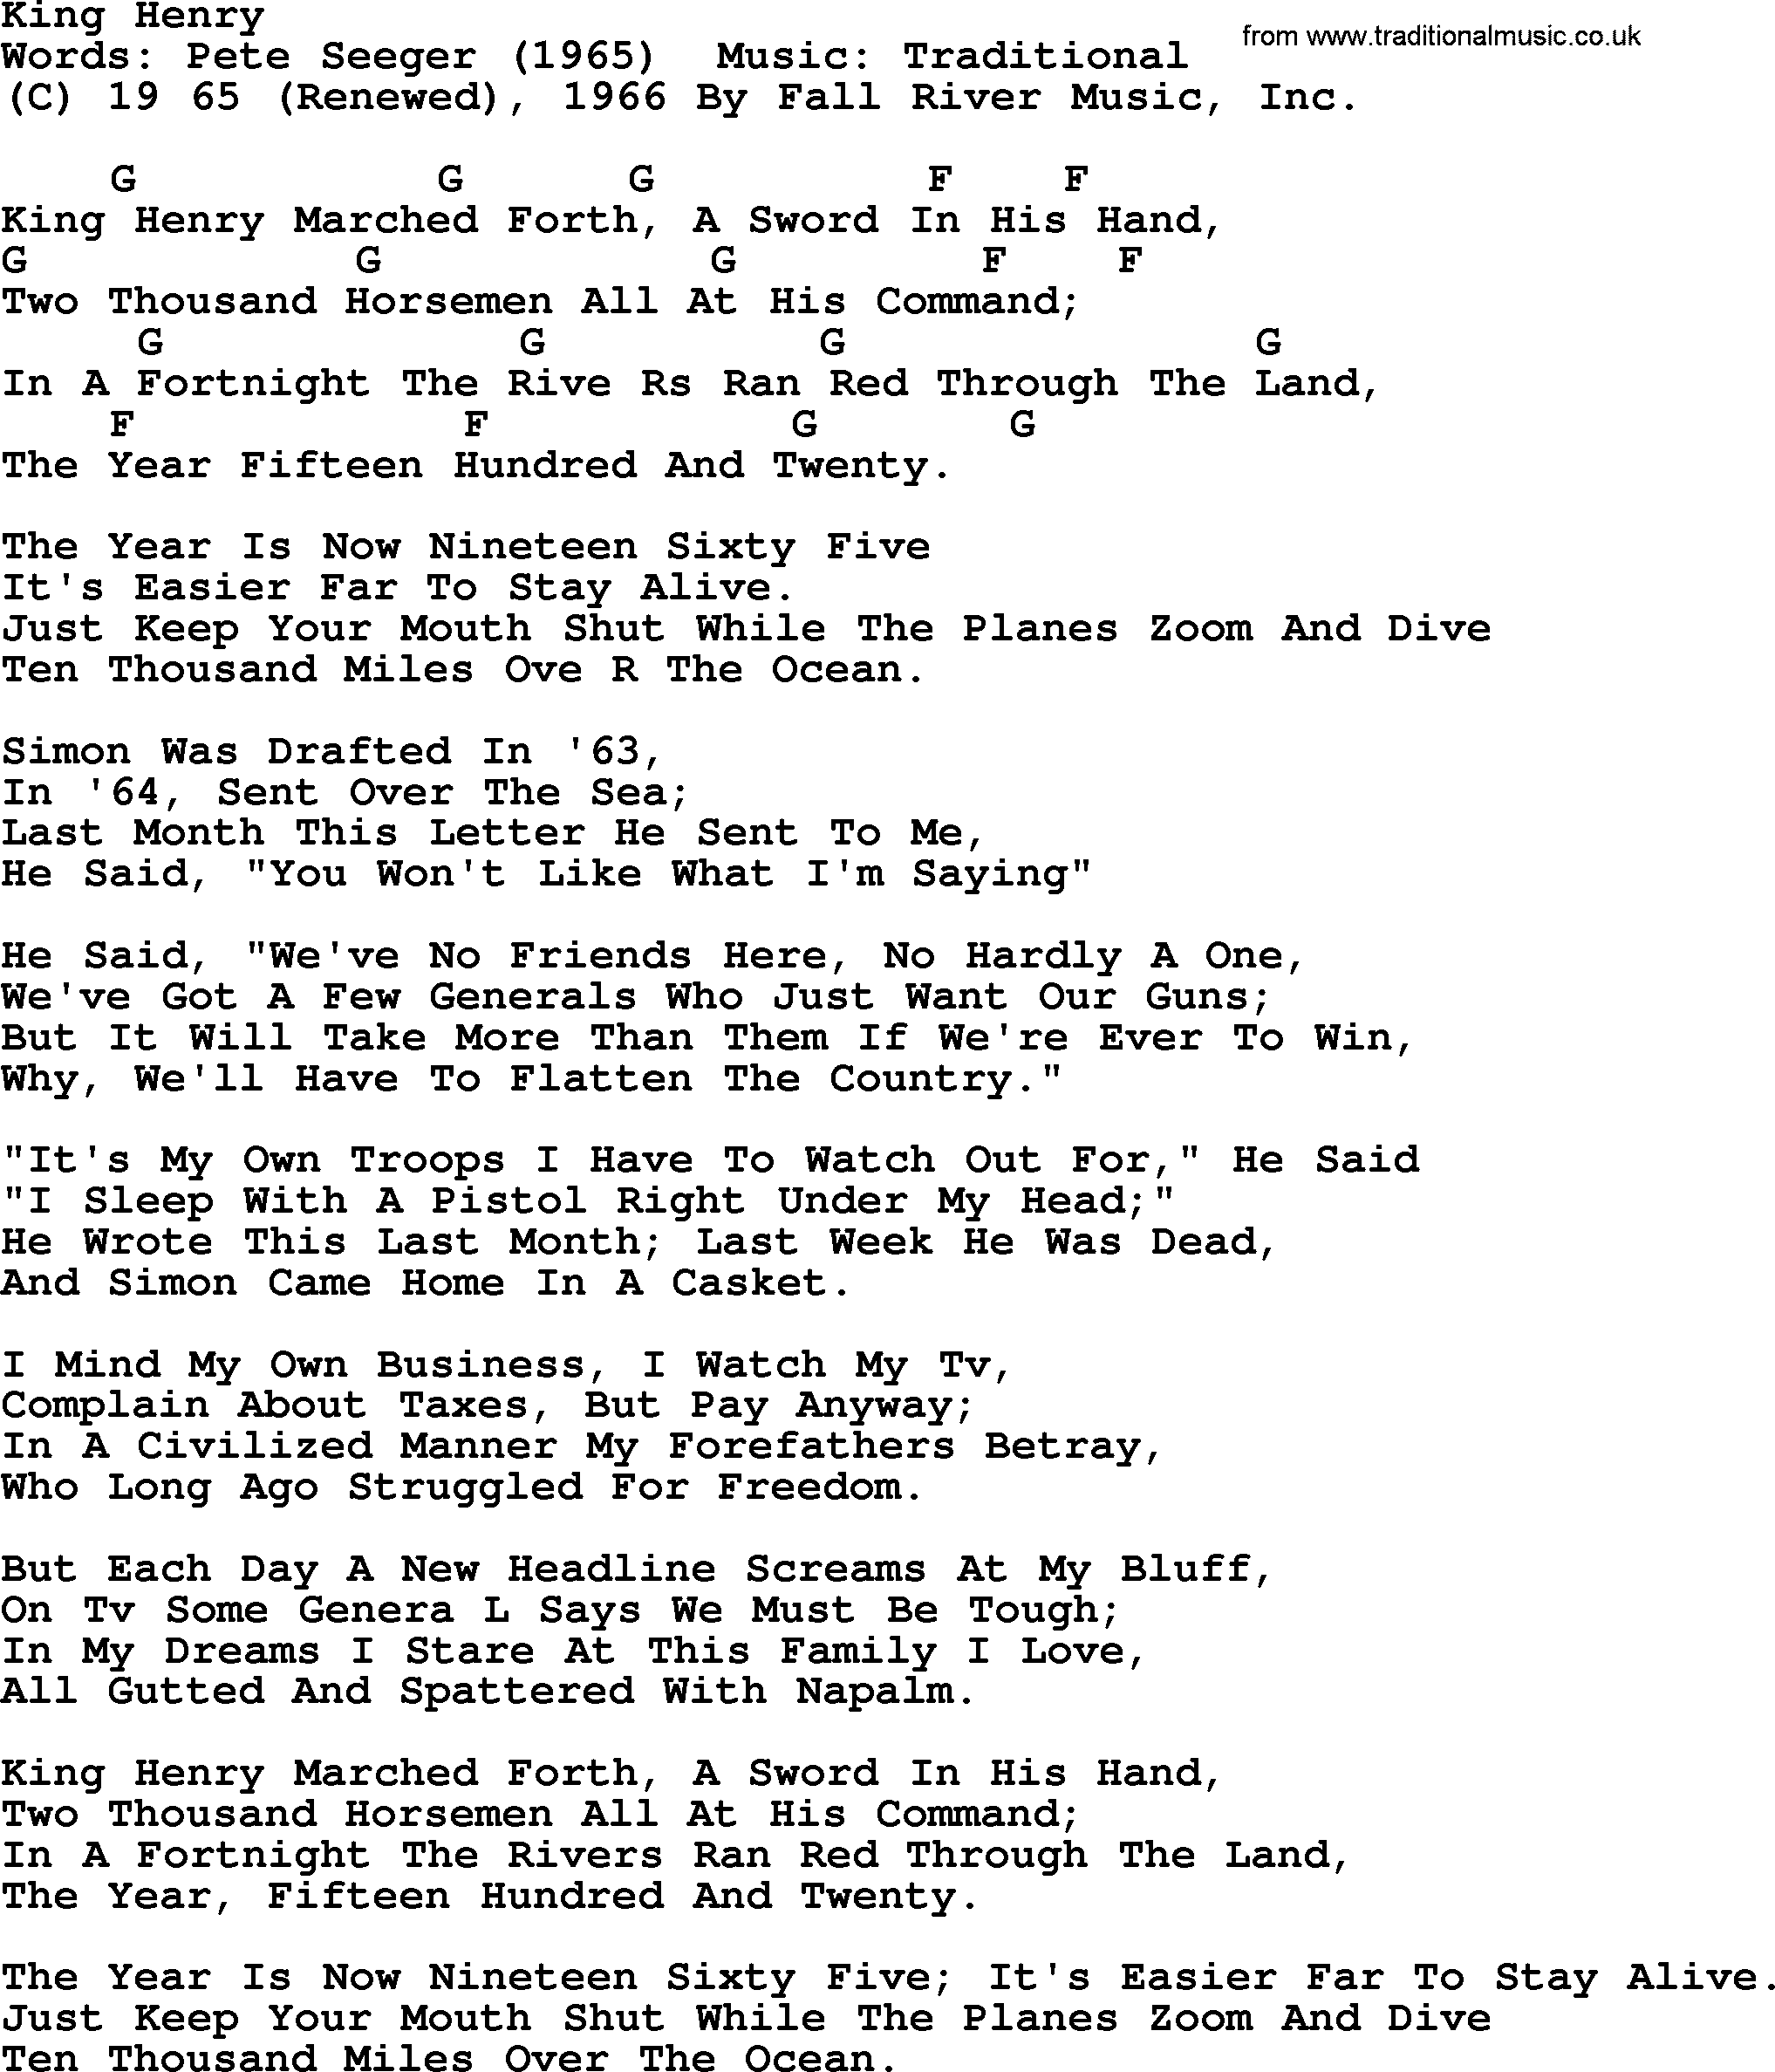 Pete Seeger song King Henry, lyrics and chords